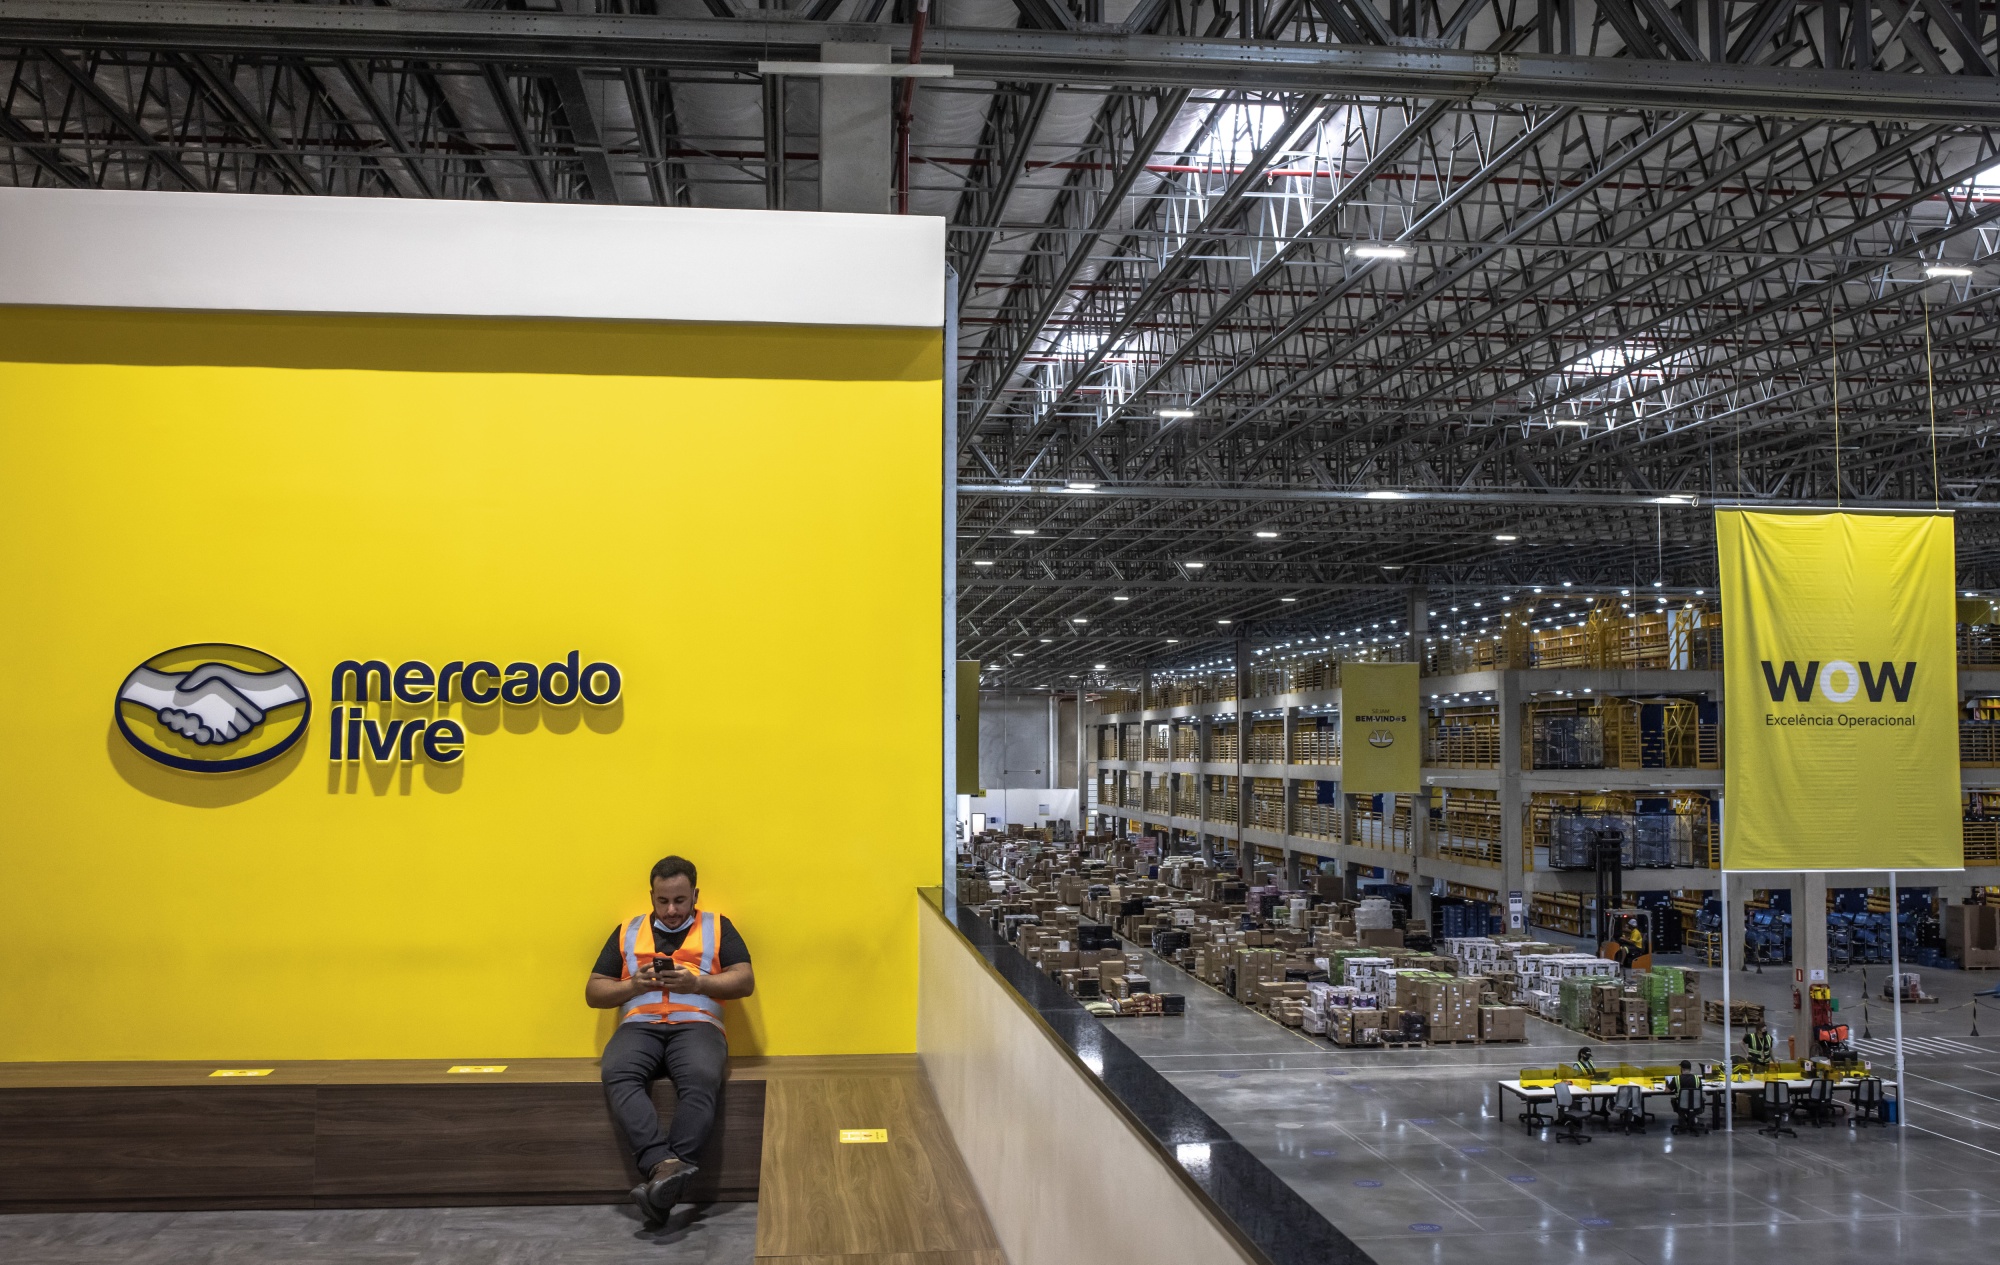 MercadoLibre (MELI) Hires Thousands in Mexico, Brazil - Bloomberg